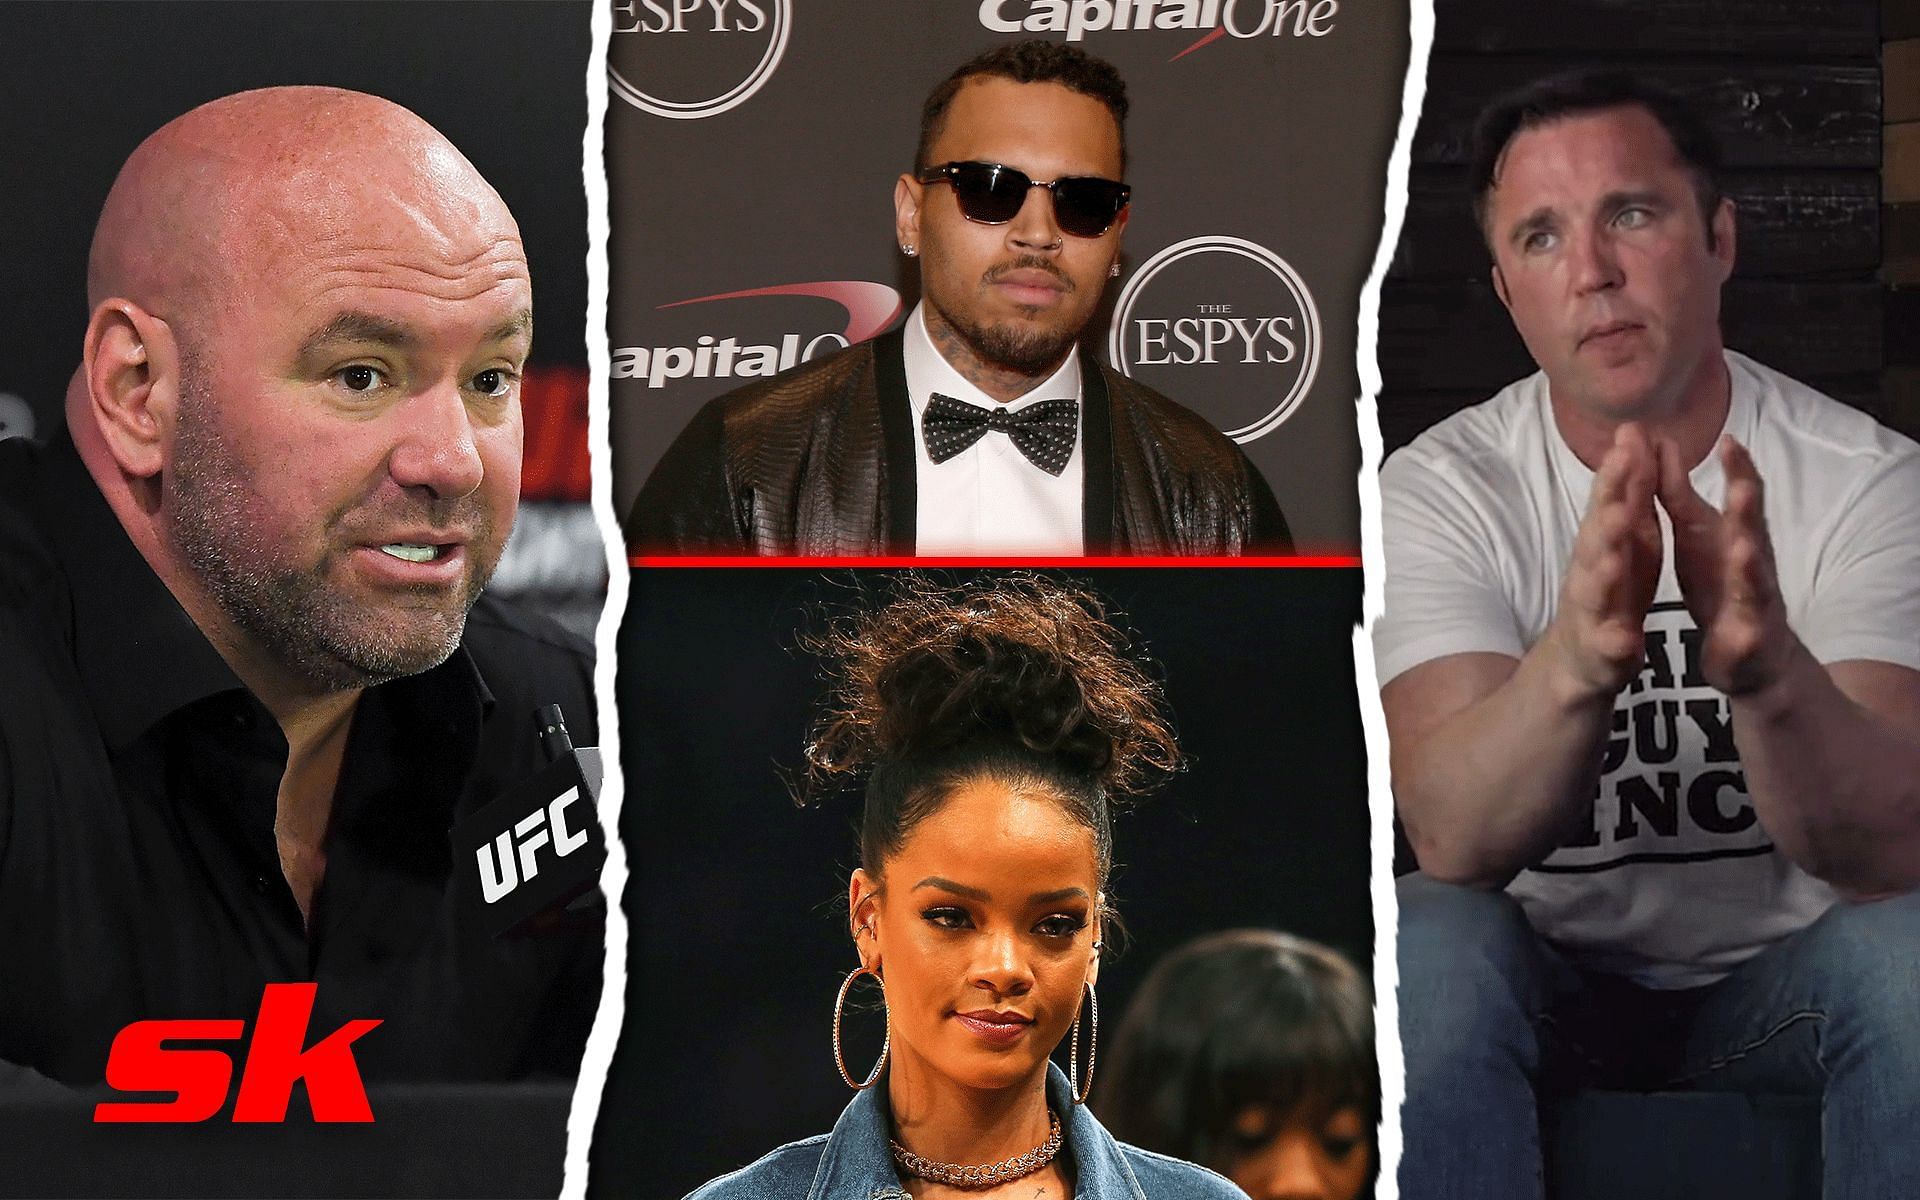 Dana White (Left), Chris Brown (Top), Rihanna (Bottom), Chael Sonnen (Right) [Image courtesy: Getty and @sonnench on Instagram]